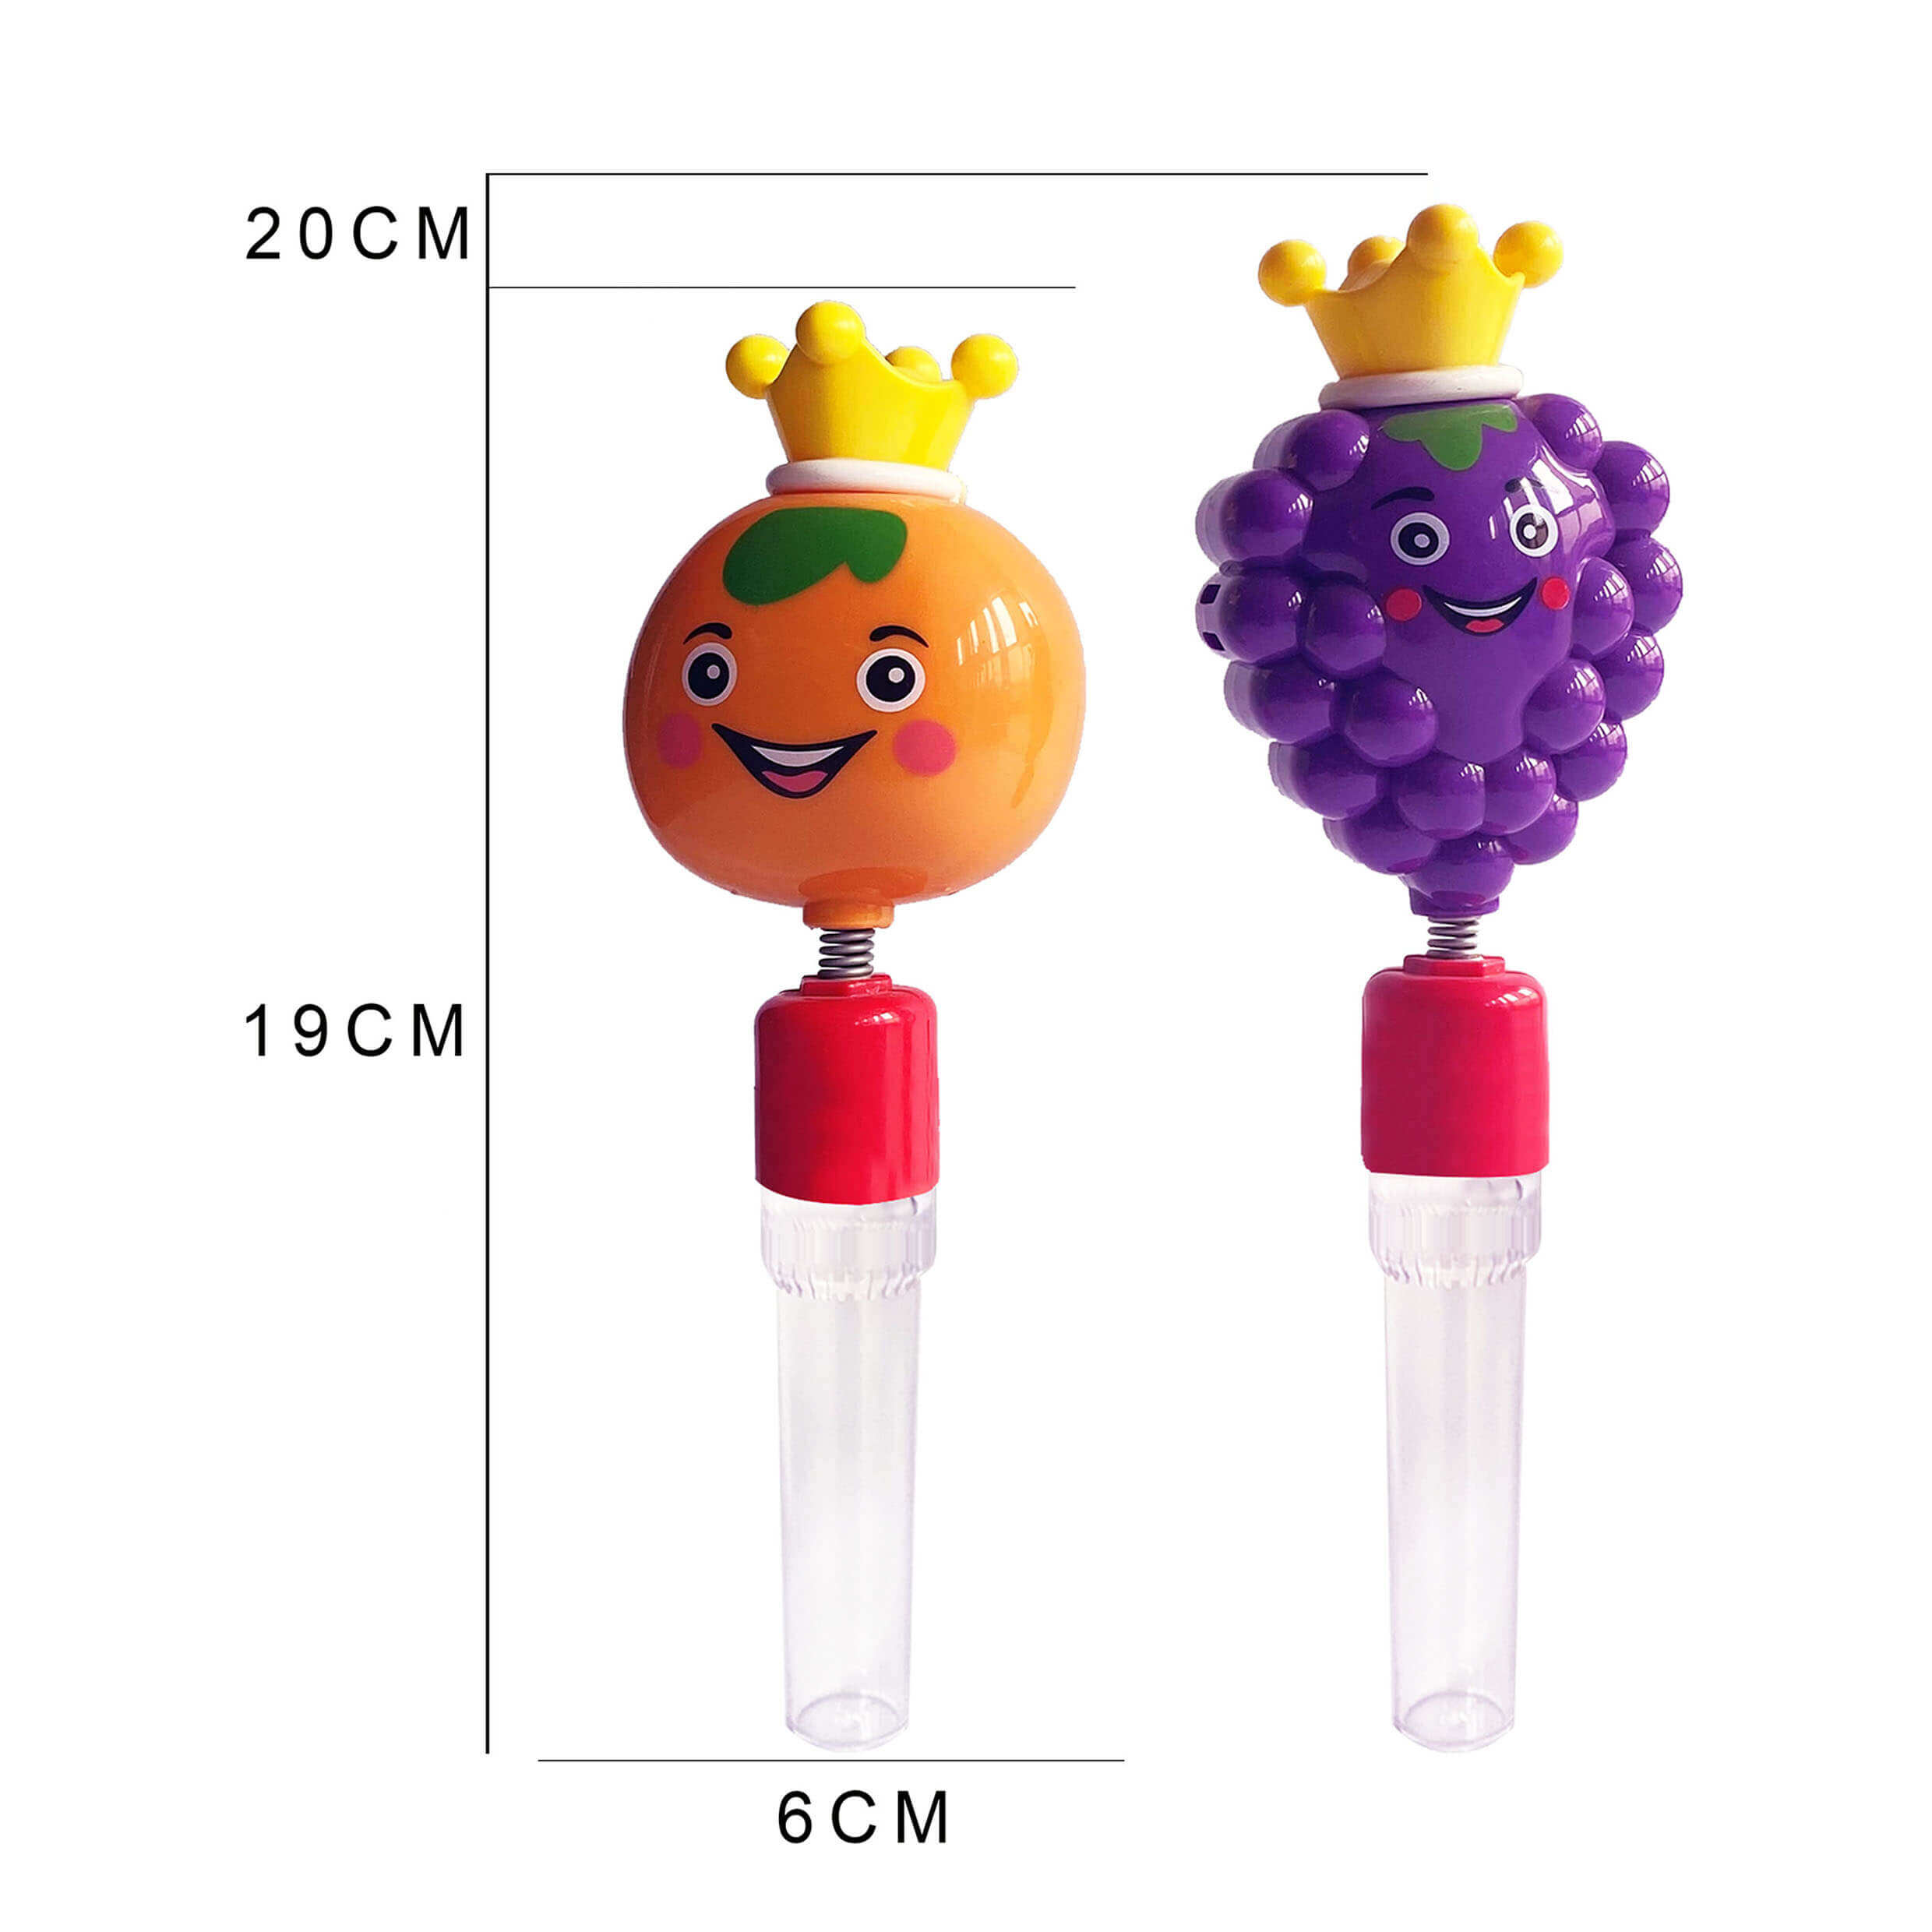 candy dispenser designs, candy kids toys, plastic candy toys